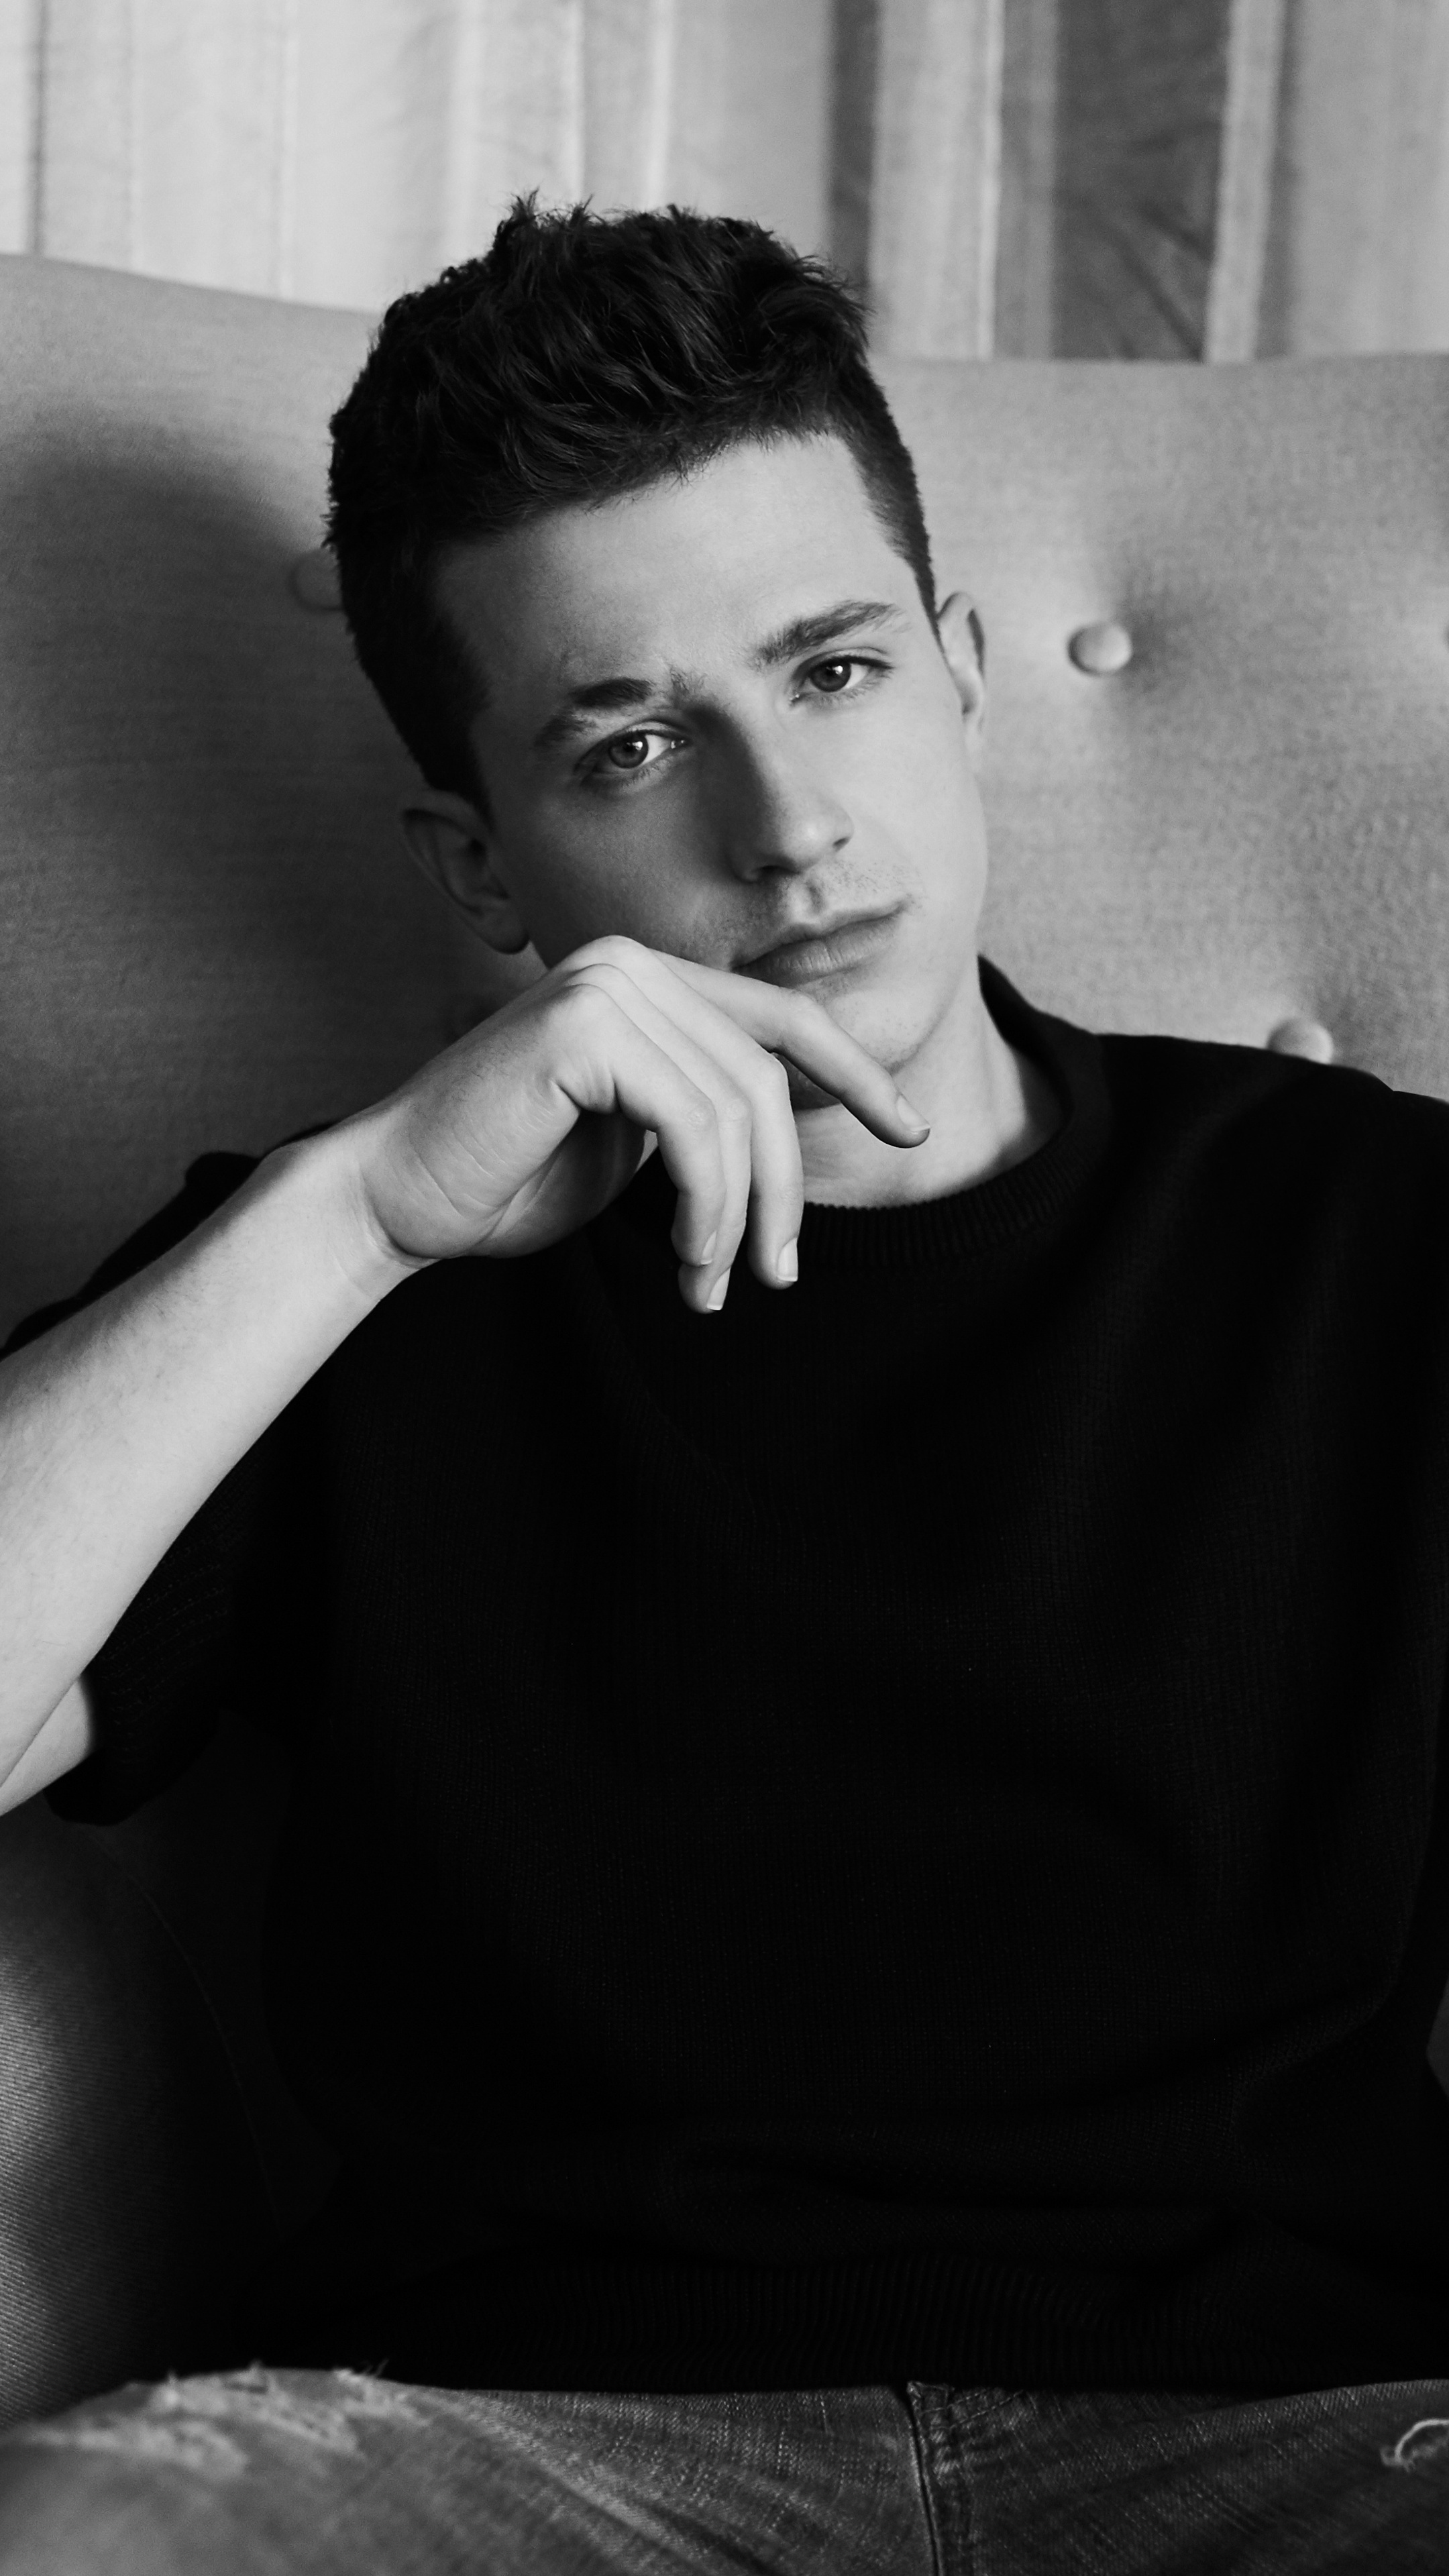 Charlie Puth: His second studio album, Voicenotes (2018), peaked at number 4 on the Billboard 200. 2160x3840 4K Wallpaper.